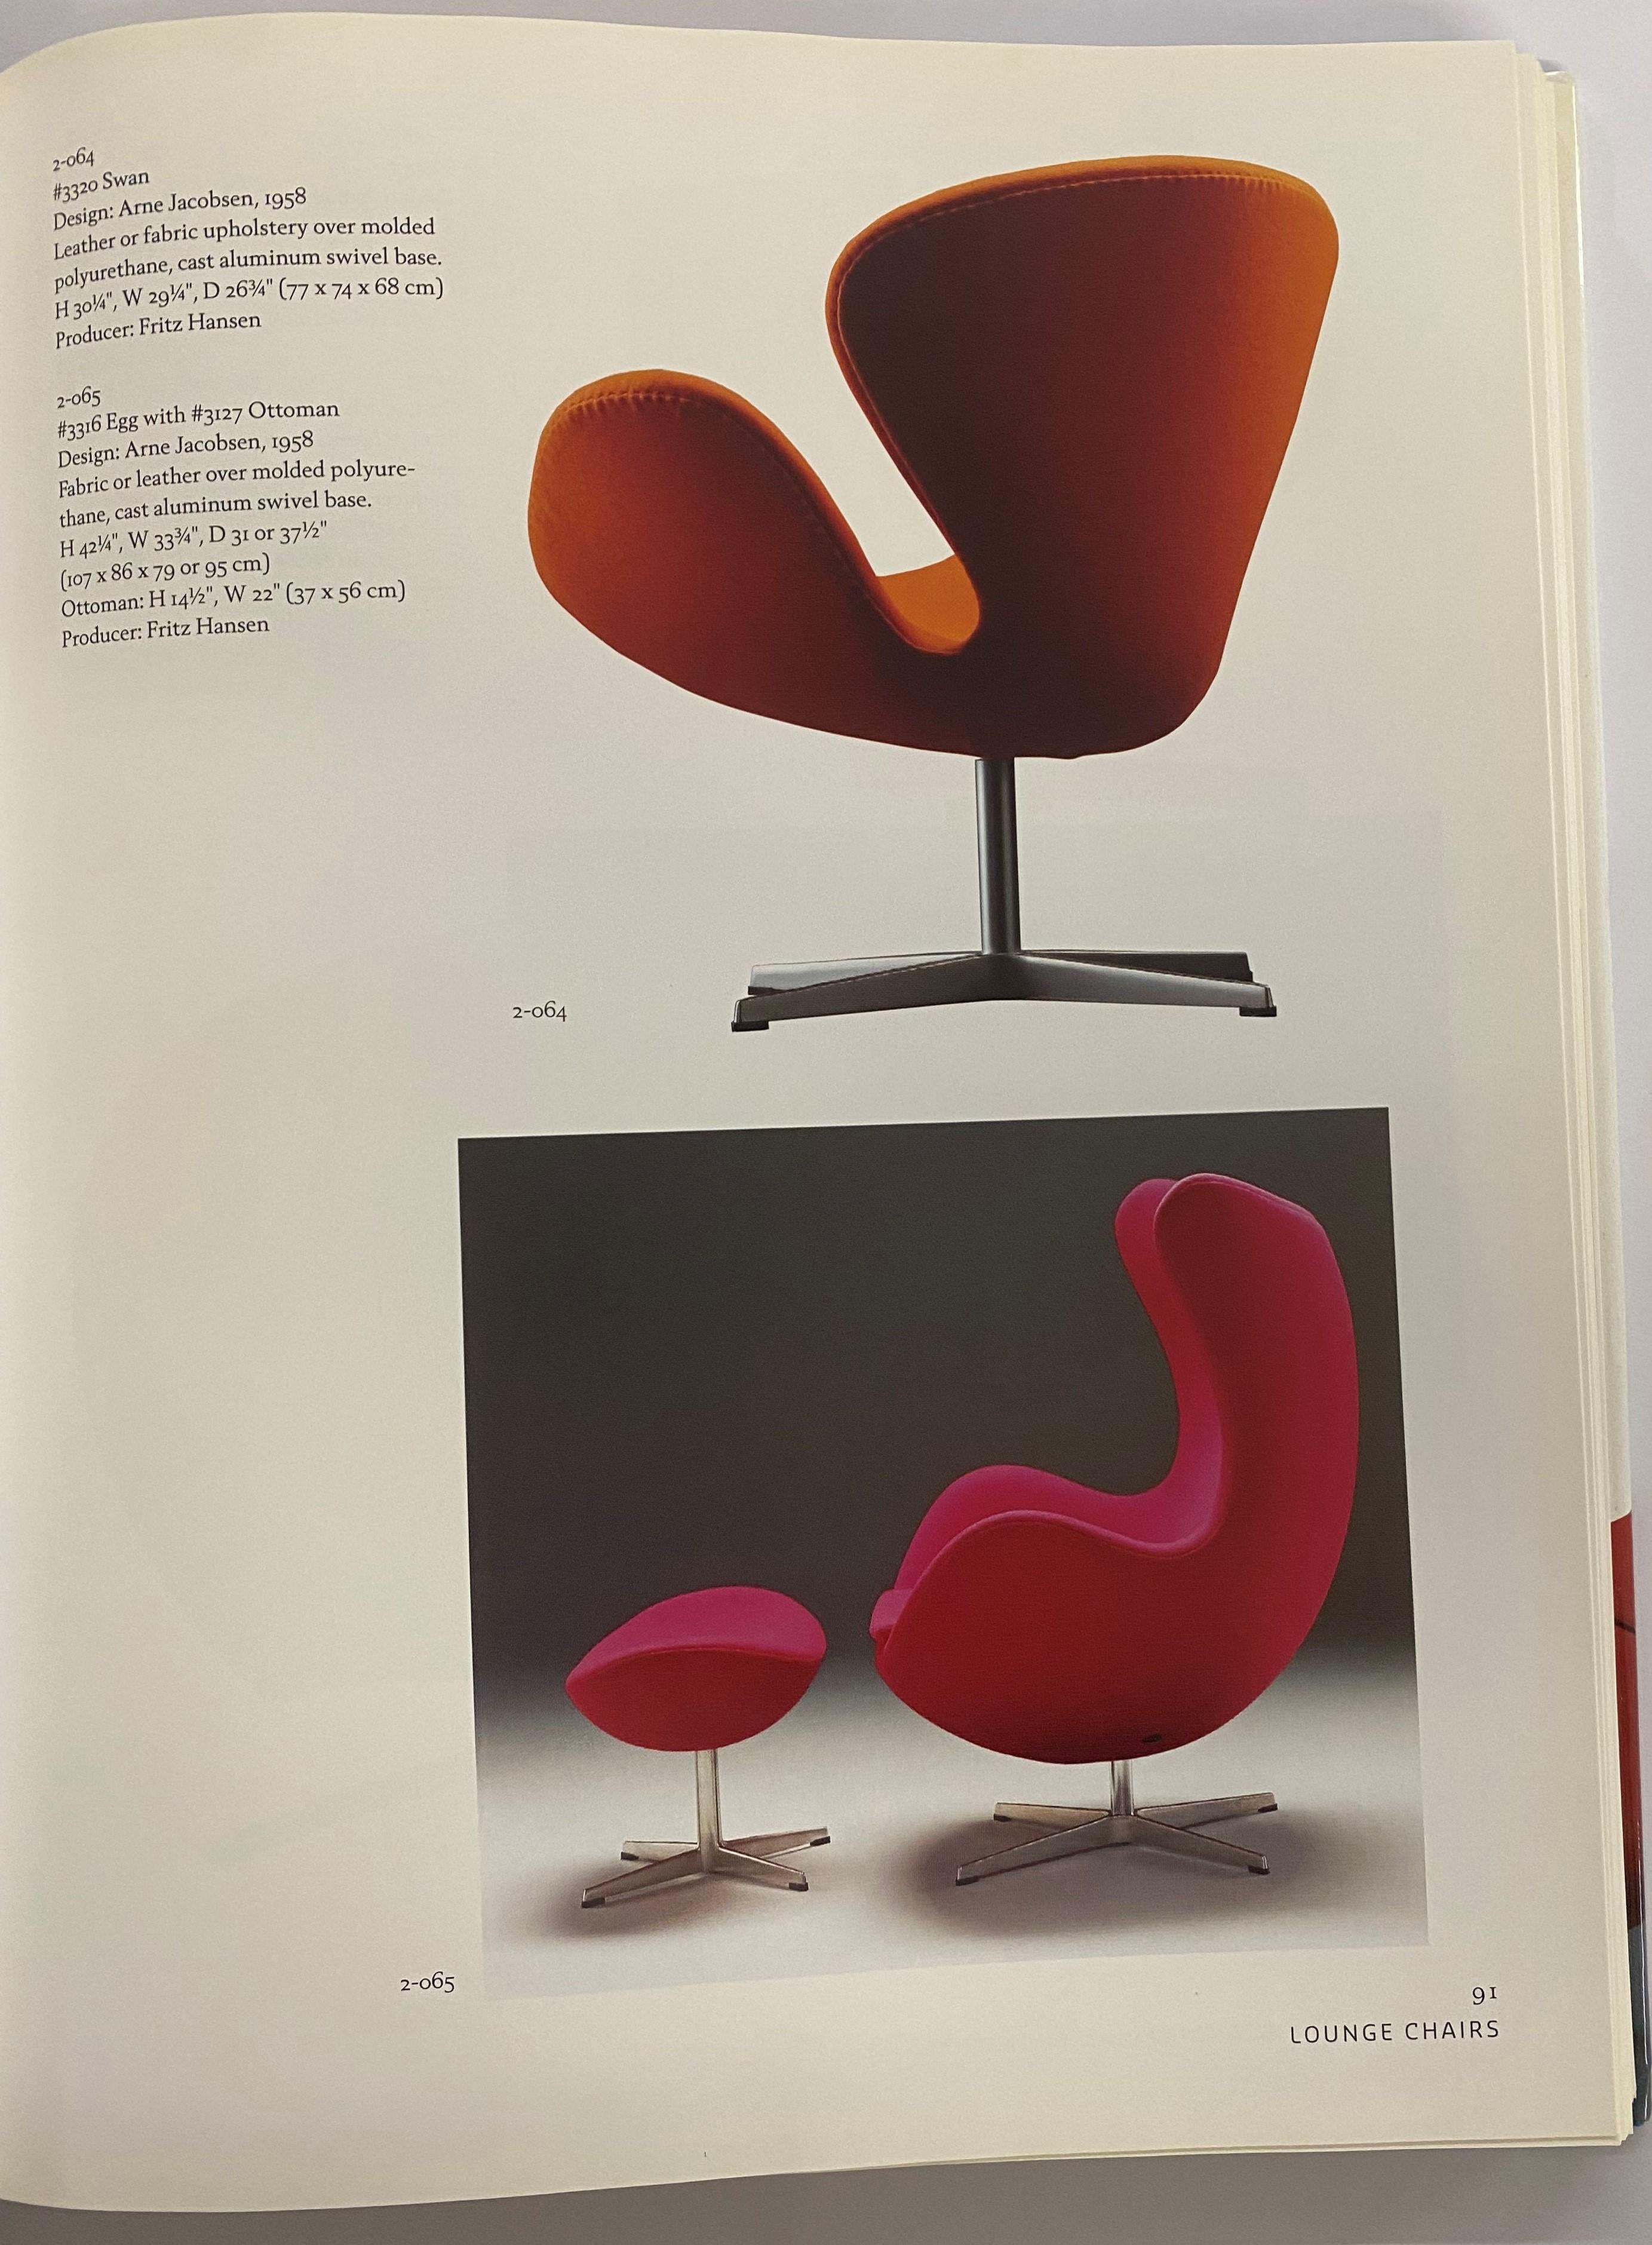 Sourcebook of Scandinavian Furniture: Designs for the 21st Century (Book) For Sale 4